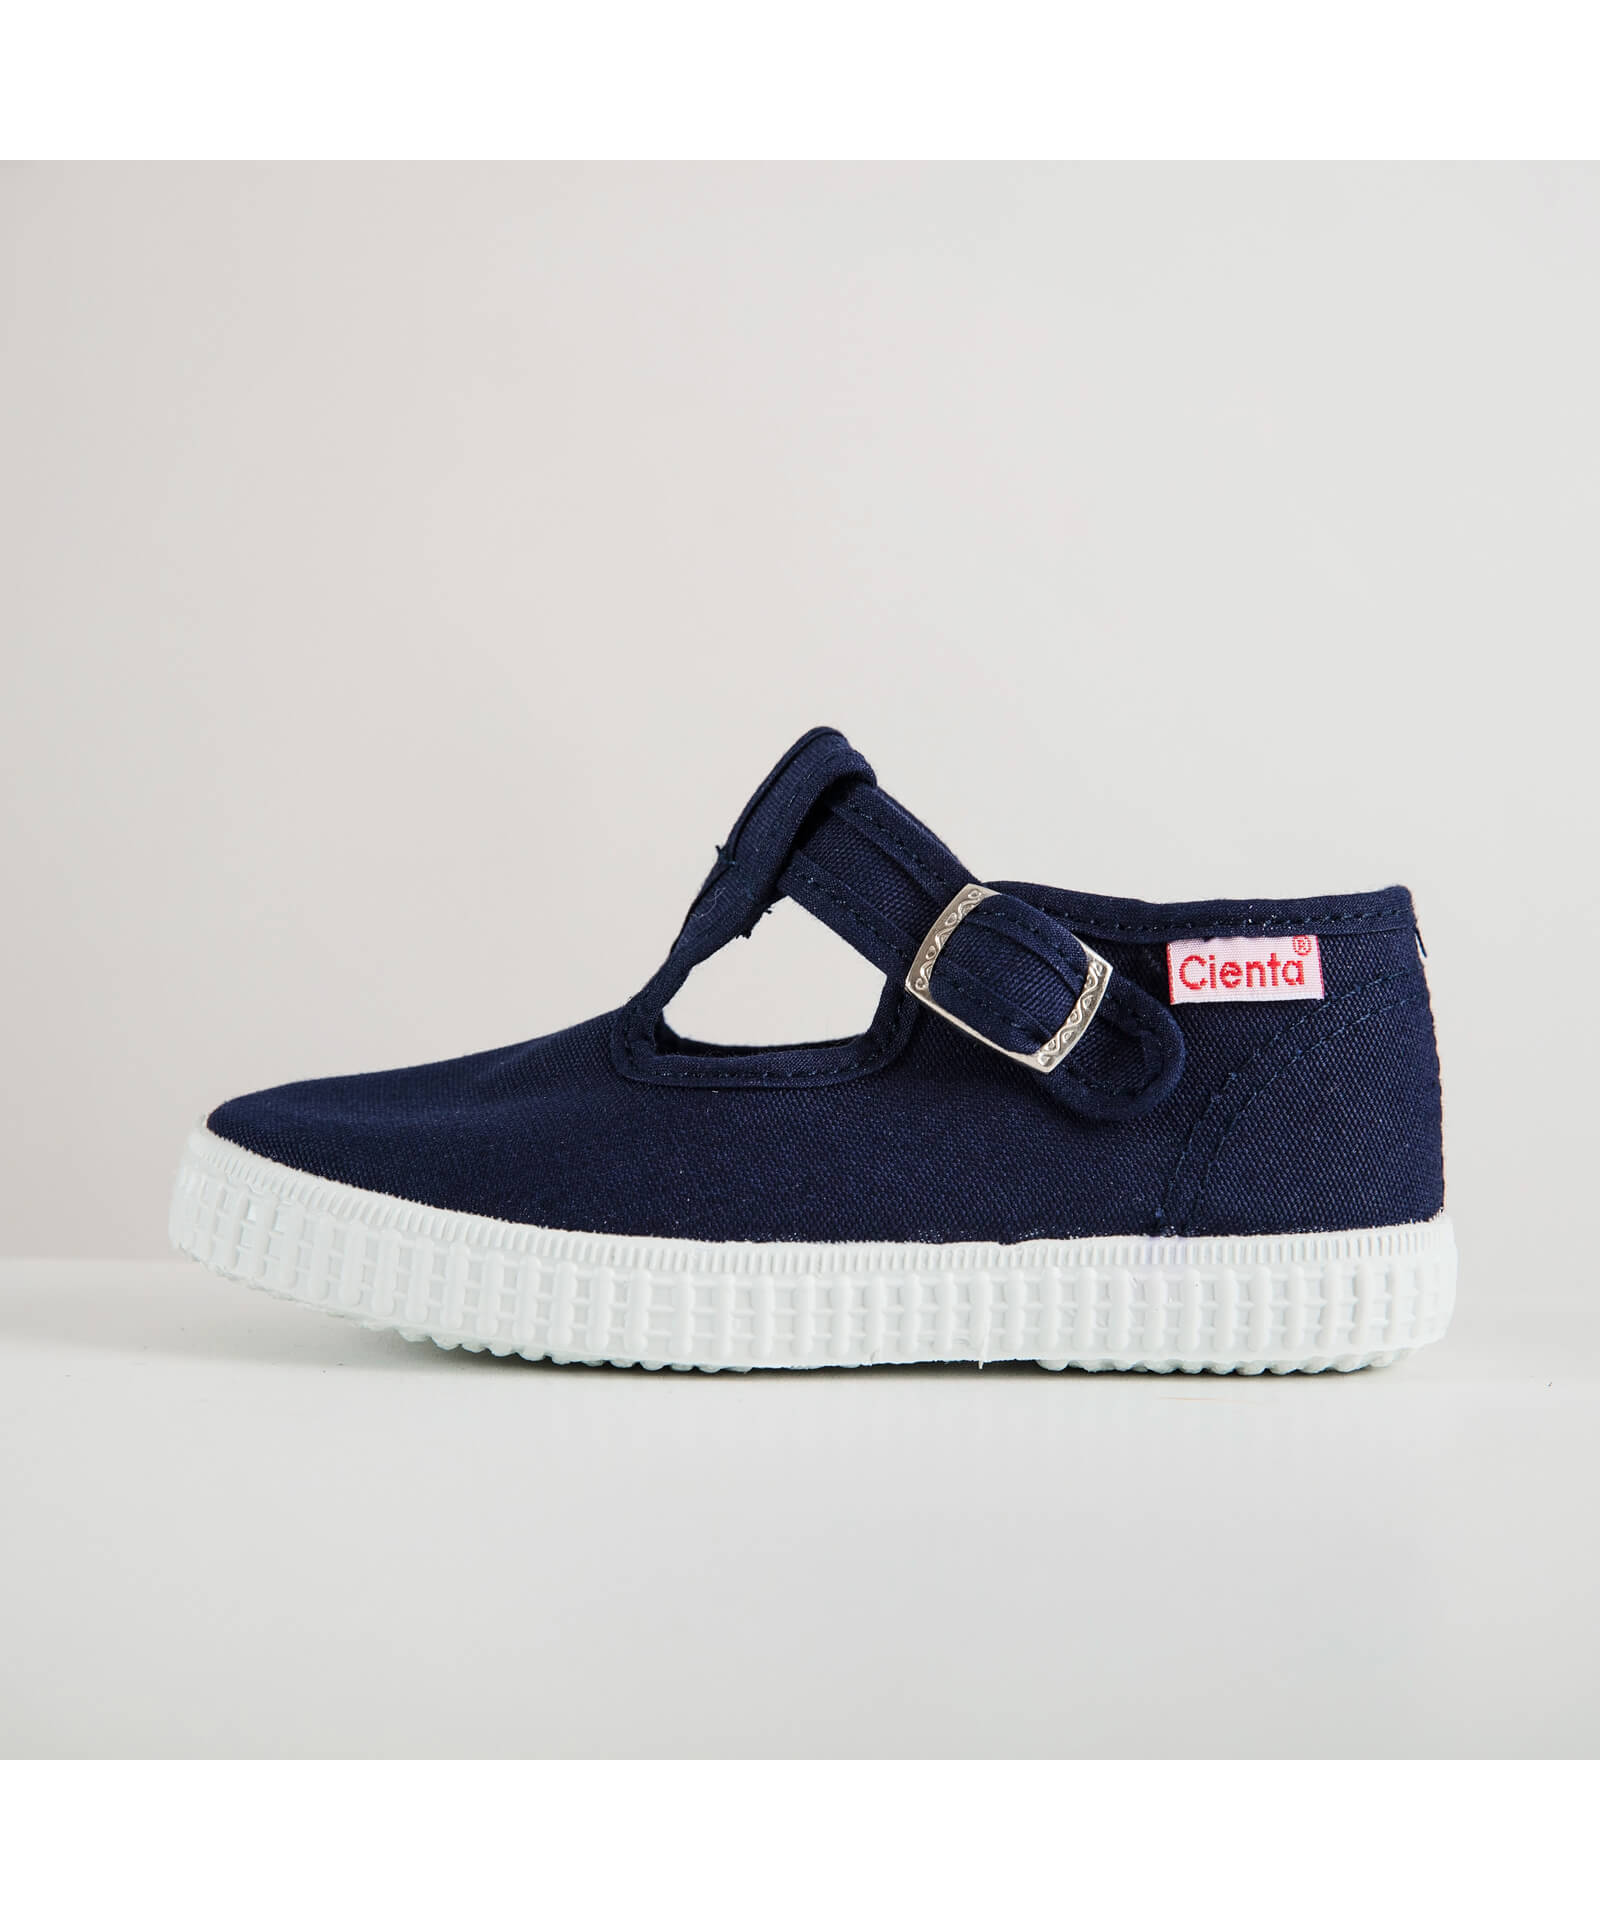 Navy T-Bars kids shoes by Cienta (side)